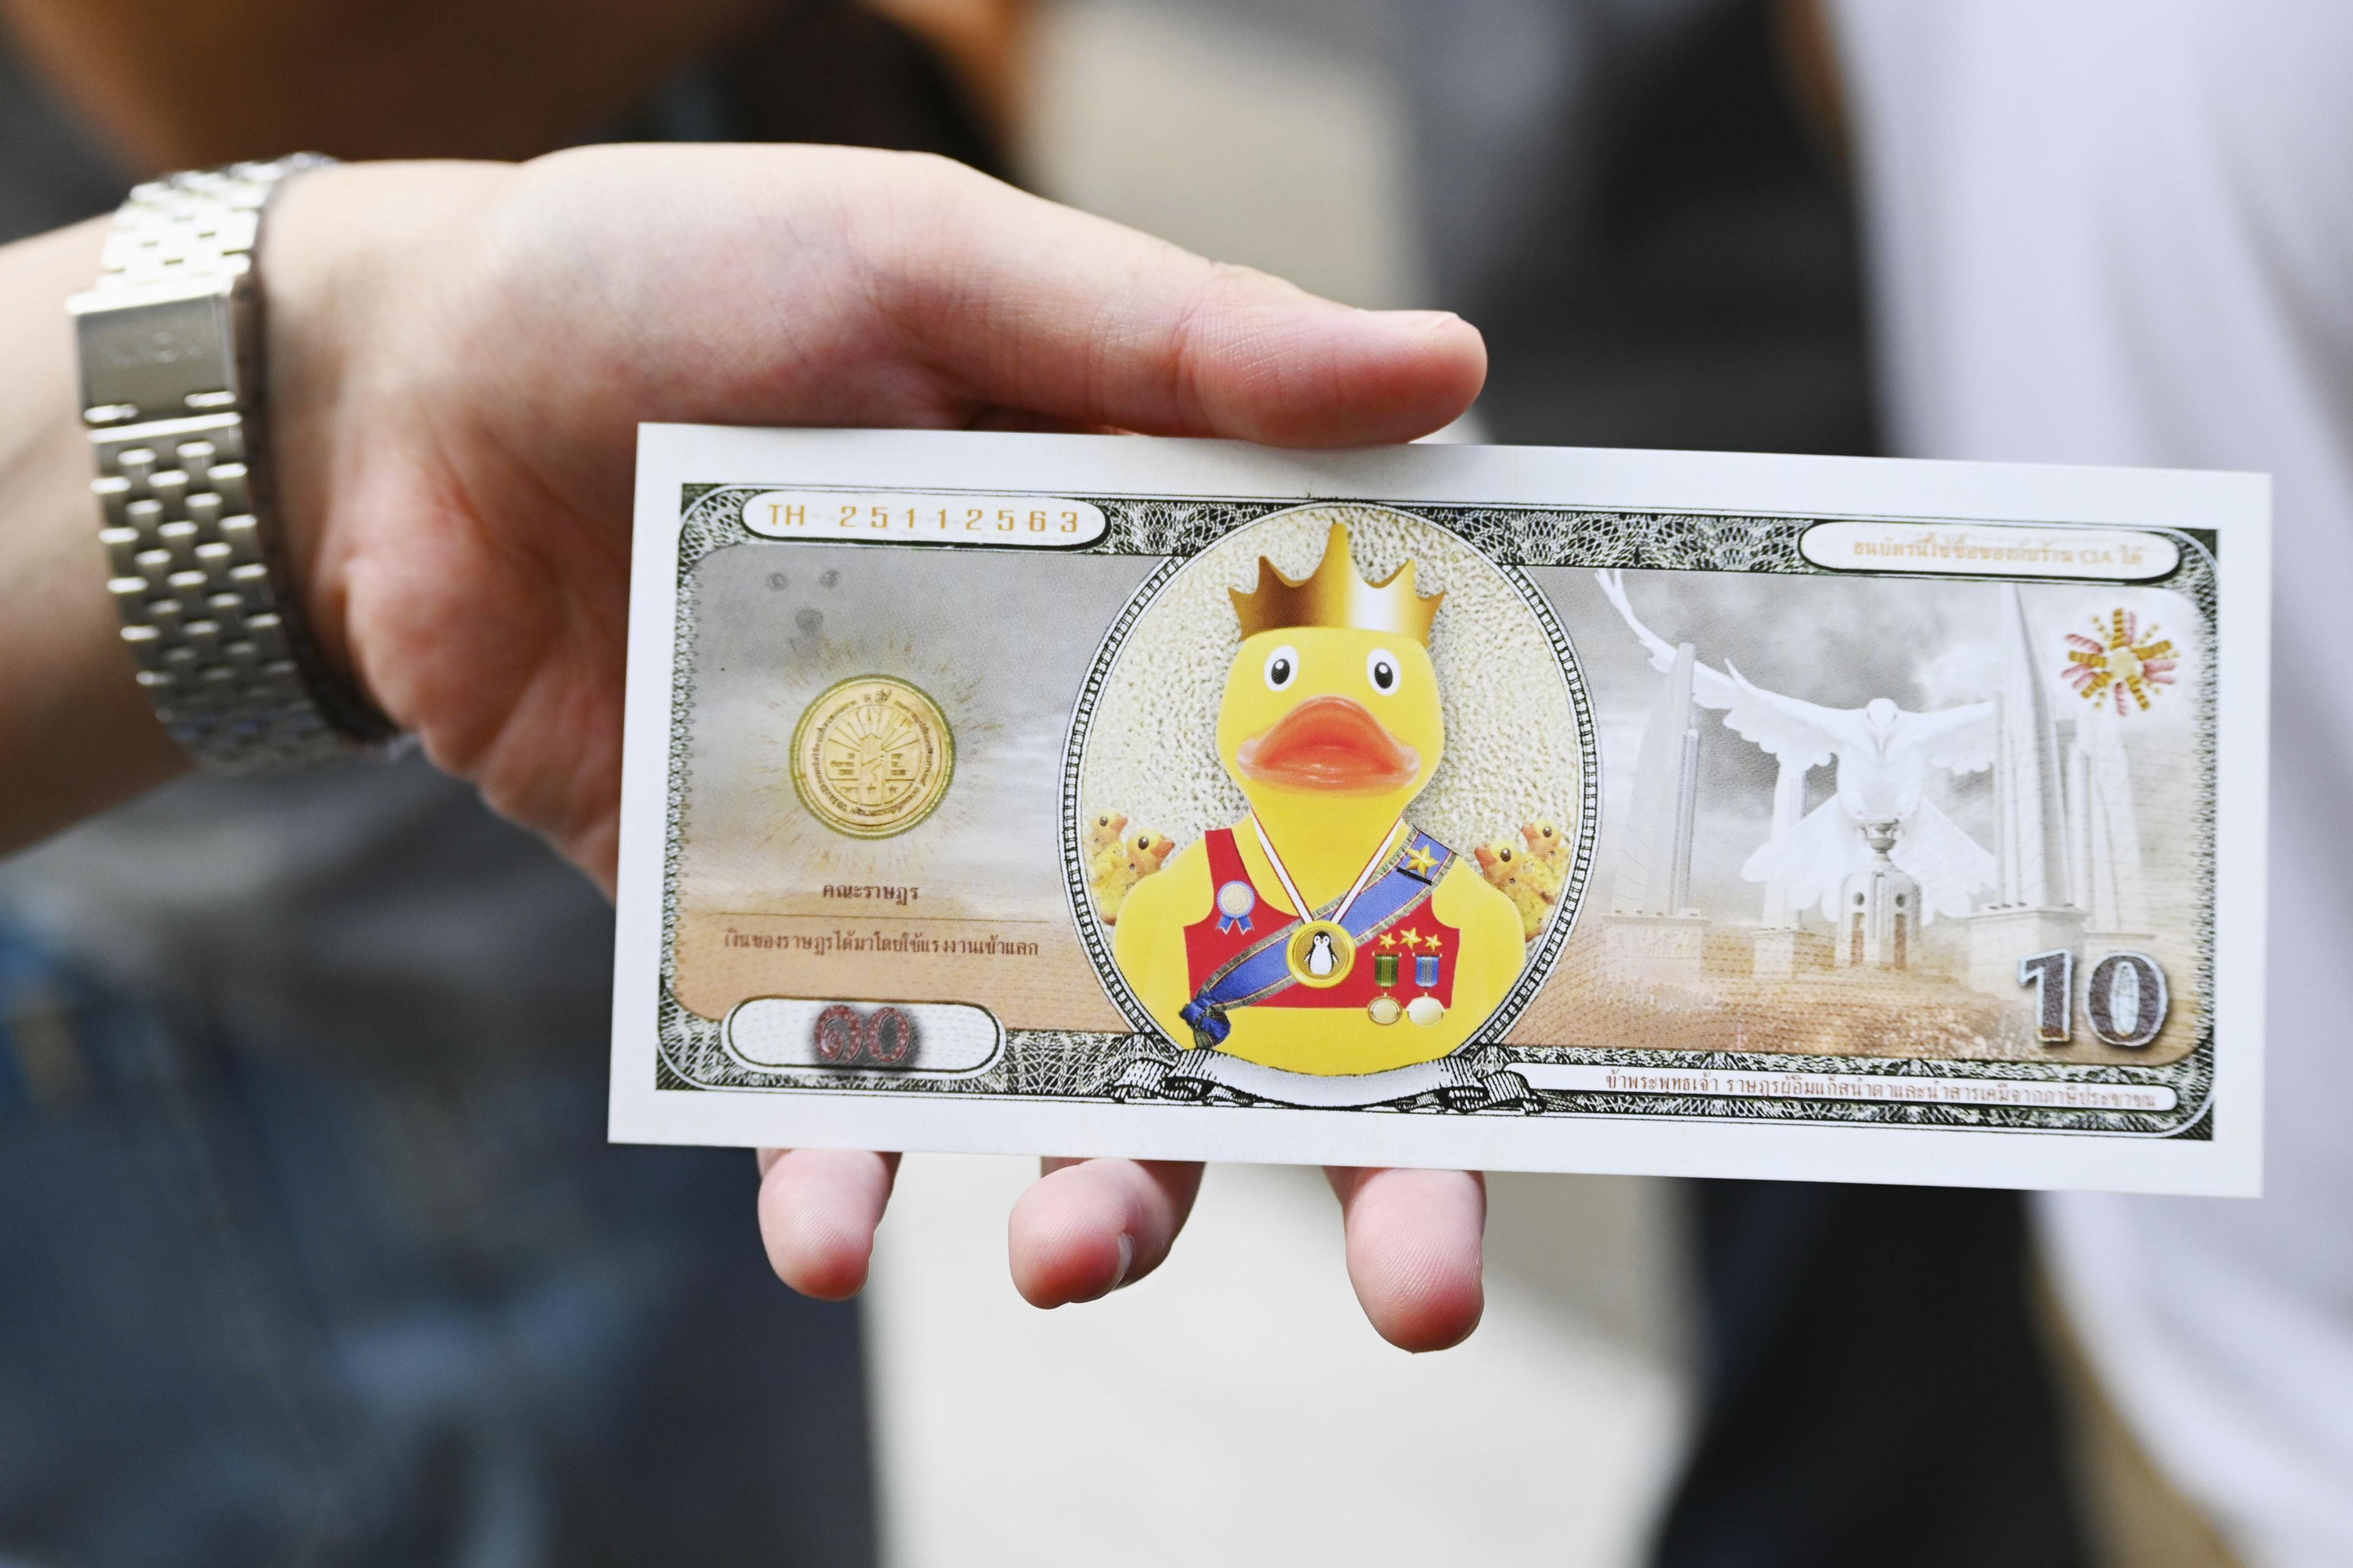 A mock 10 baht banknote bearing an illustration of a yellow duck instead of the Thai king or his predecessor is pictured in Bangkok on Nov. 25, 2020.